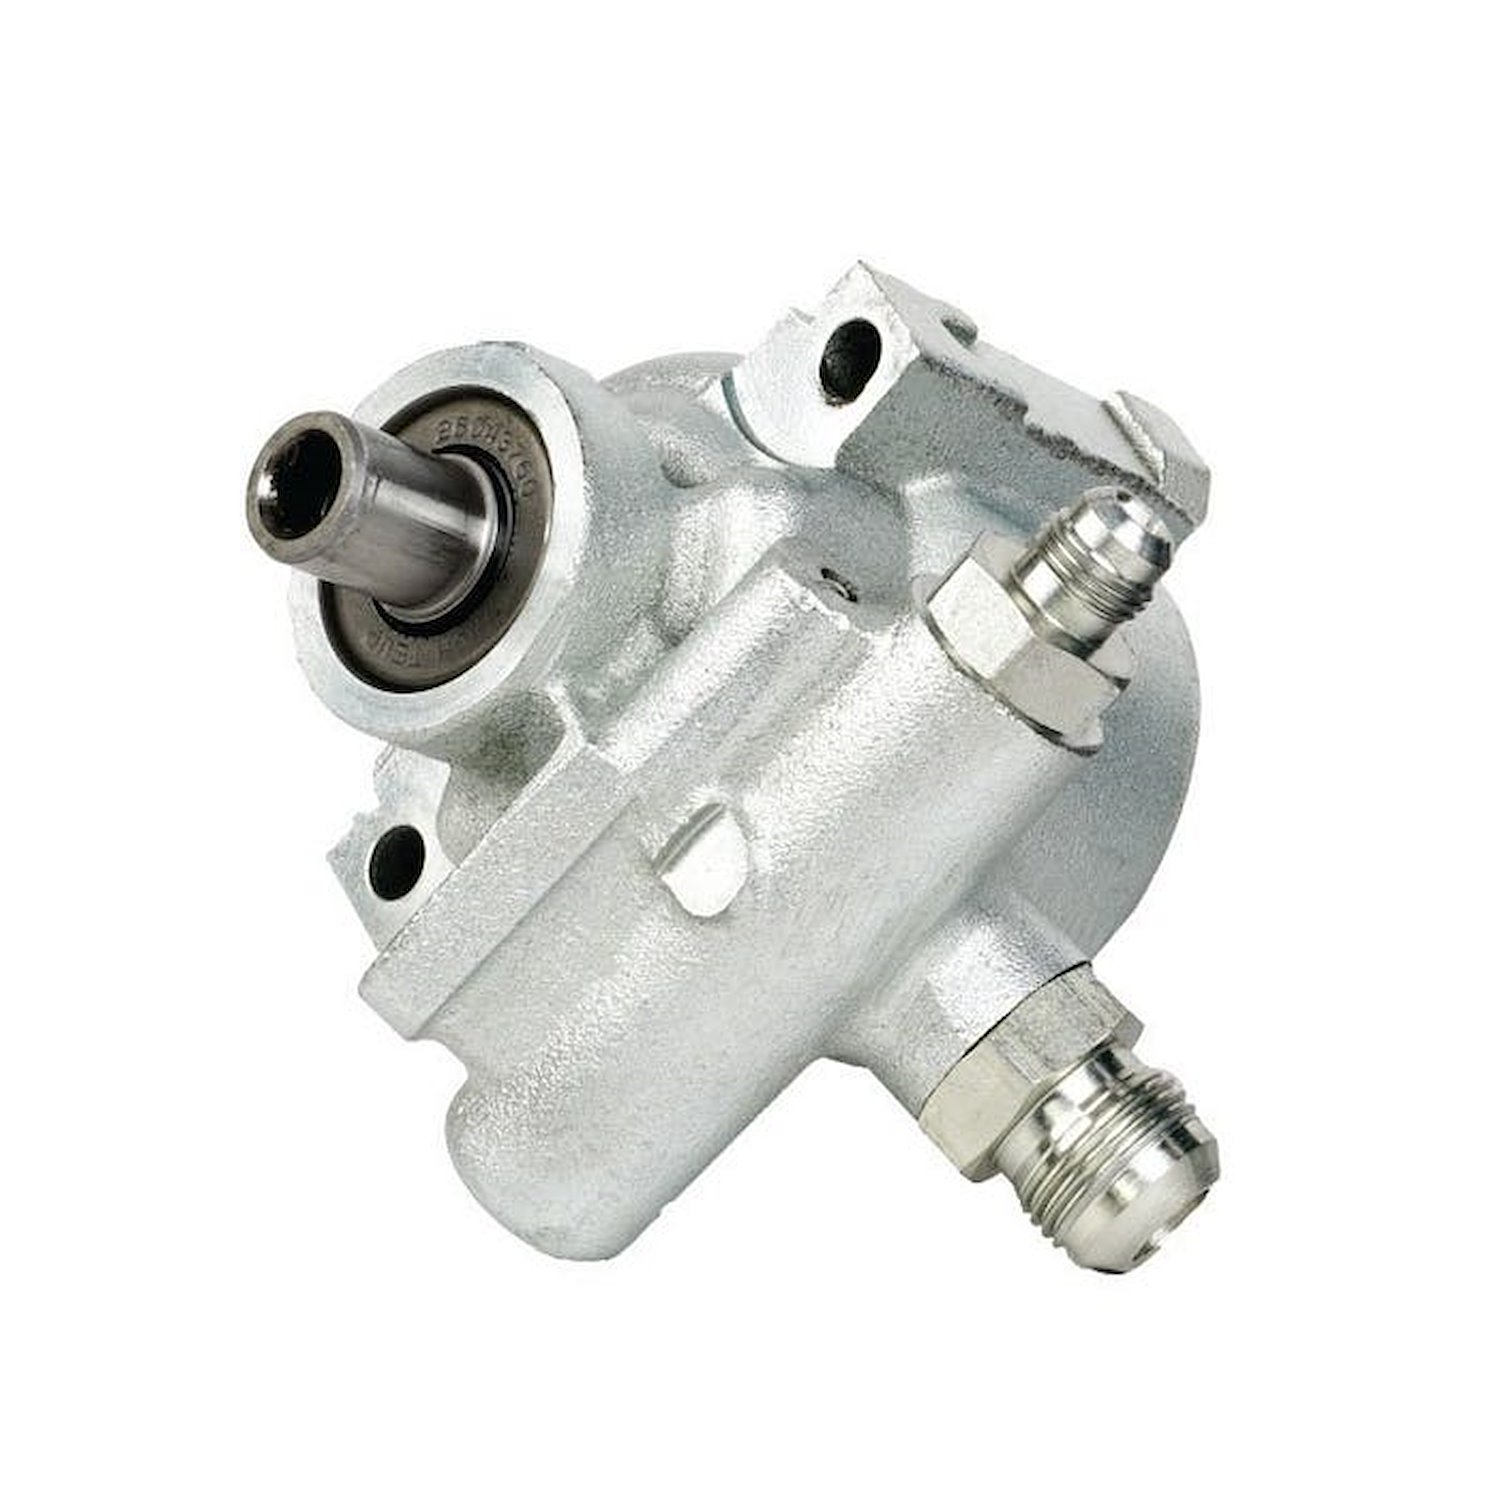 130303-KIT Power Steering Pump, Trail-Gear Power Flow 1650  PSI Without Pulley For Custom Hydraulic RAM Steering